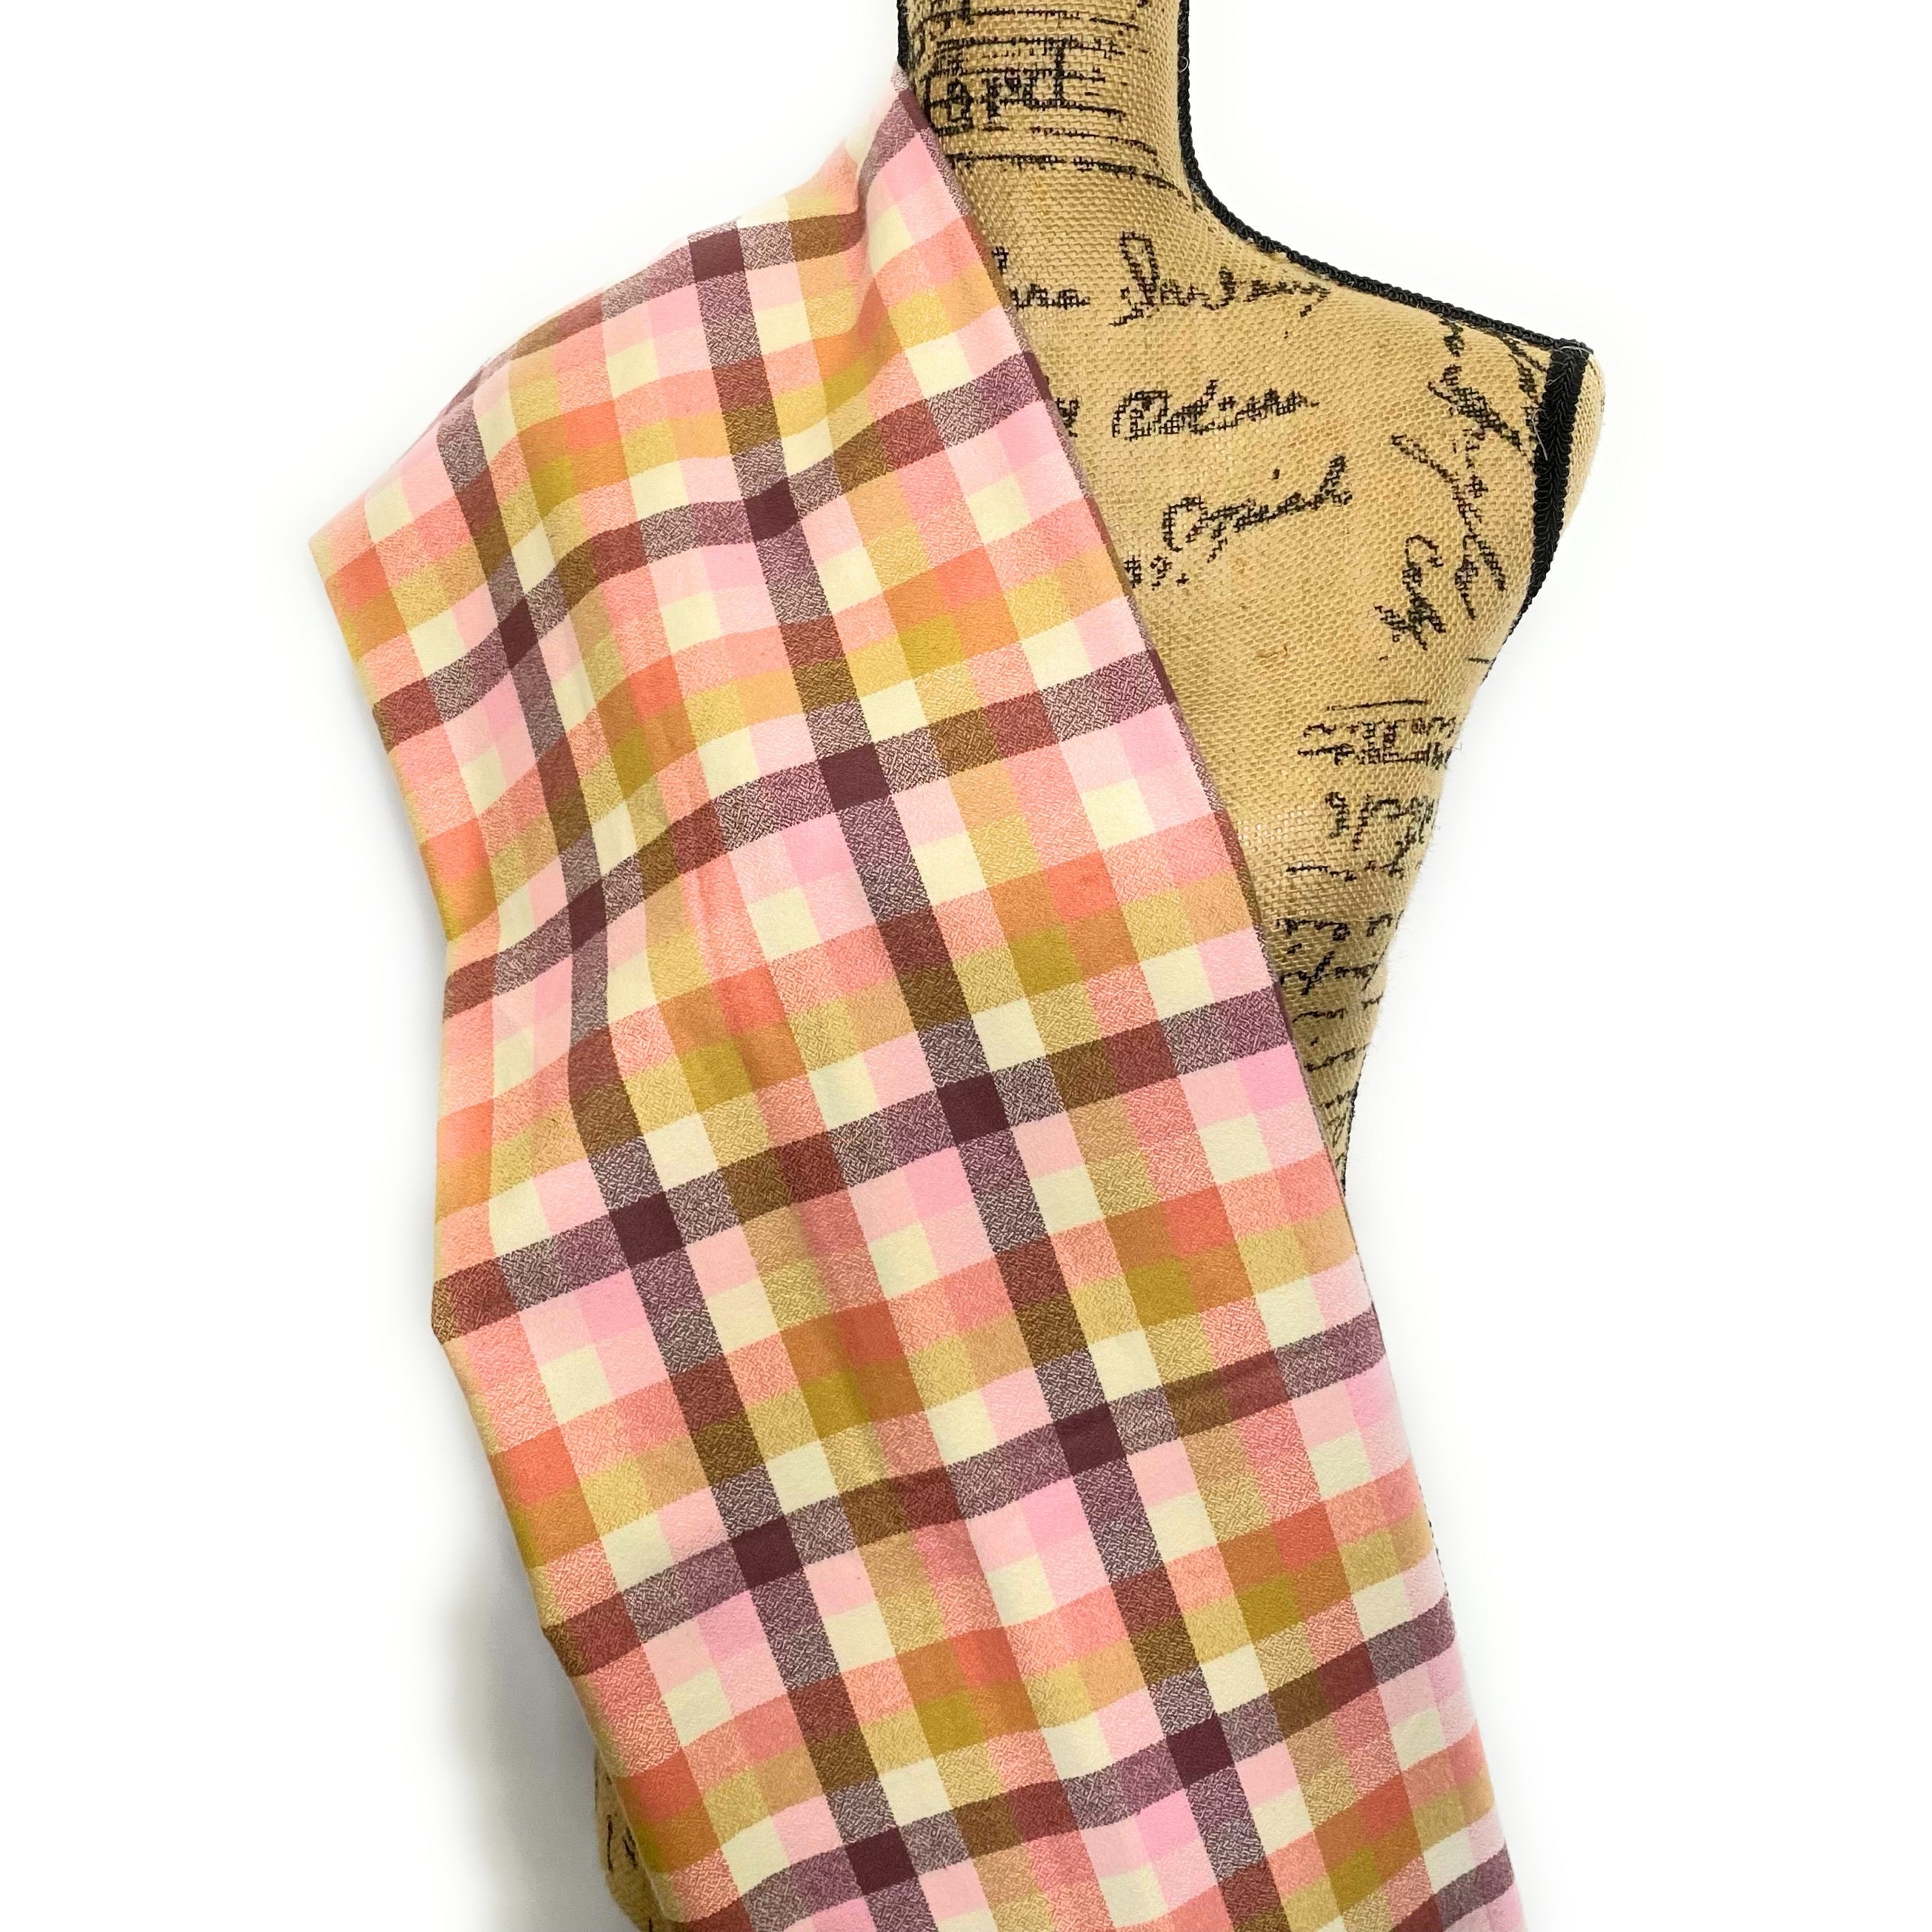 100% Organic Cotton Neapolitan Shades of Cream, Pink, and Chocolatey Taupe and Deep Maroon Plaid Infinity and Blanket Scarves